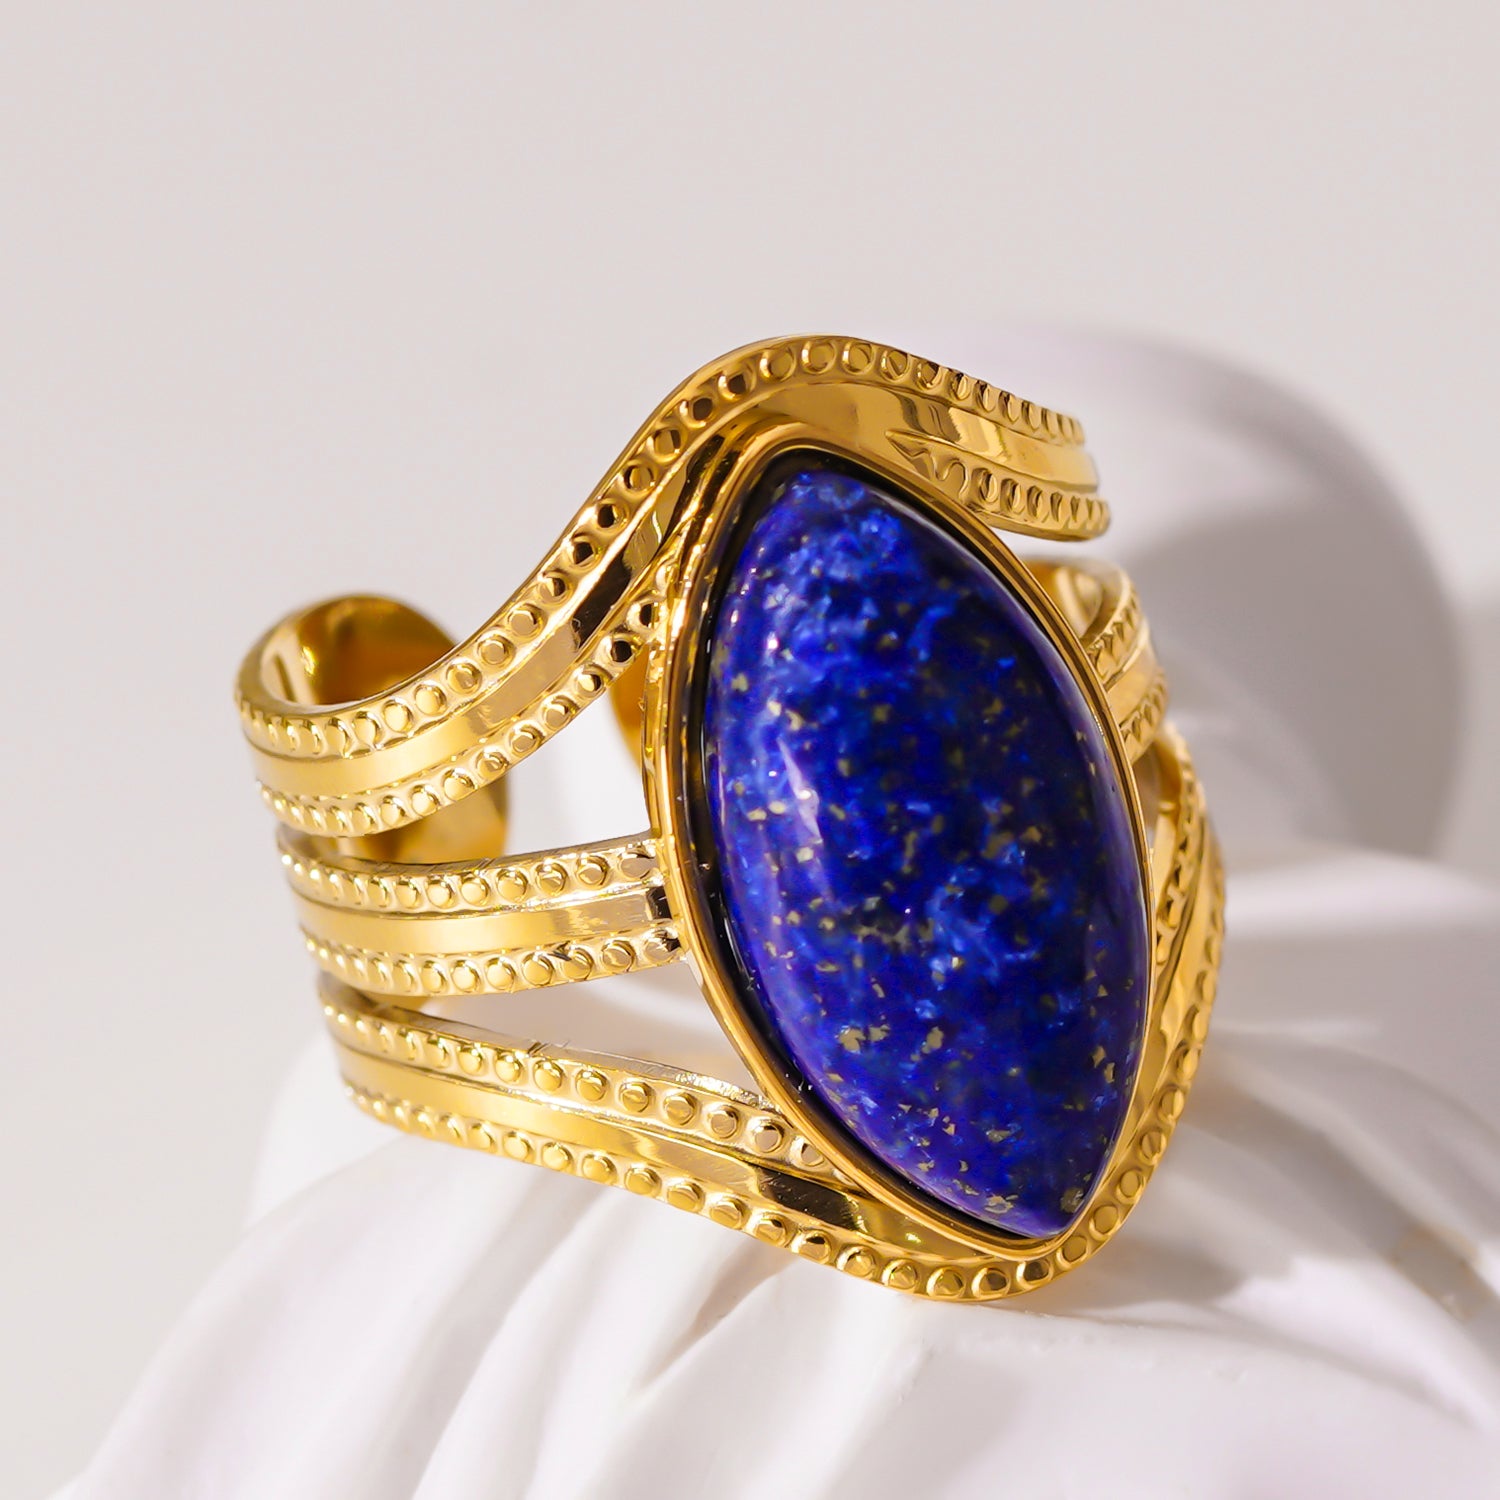 Style TIAMO 7348: Vintage Inspired Ring with Triple Ornate Bands &amp; a Lapis Lazuli Centre Piece.